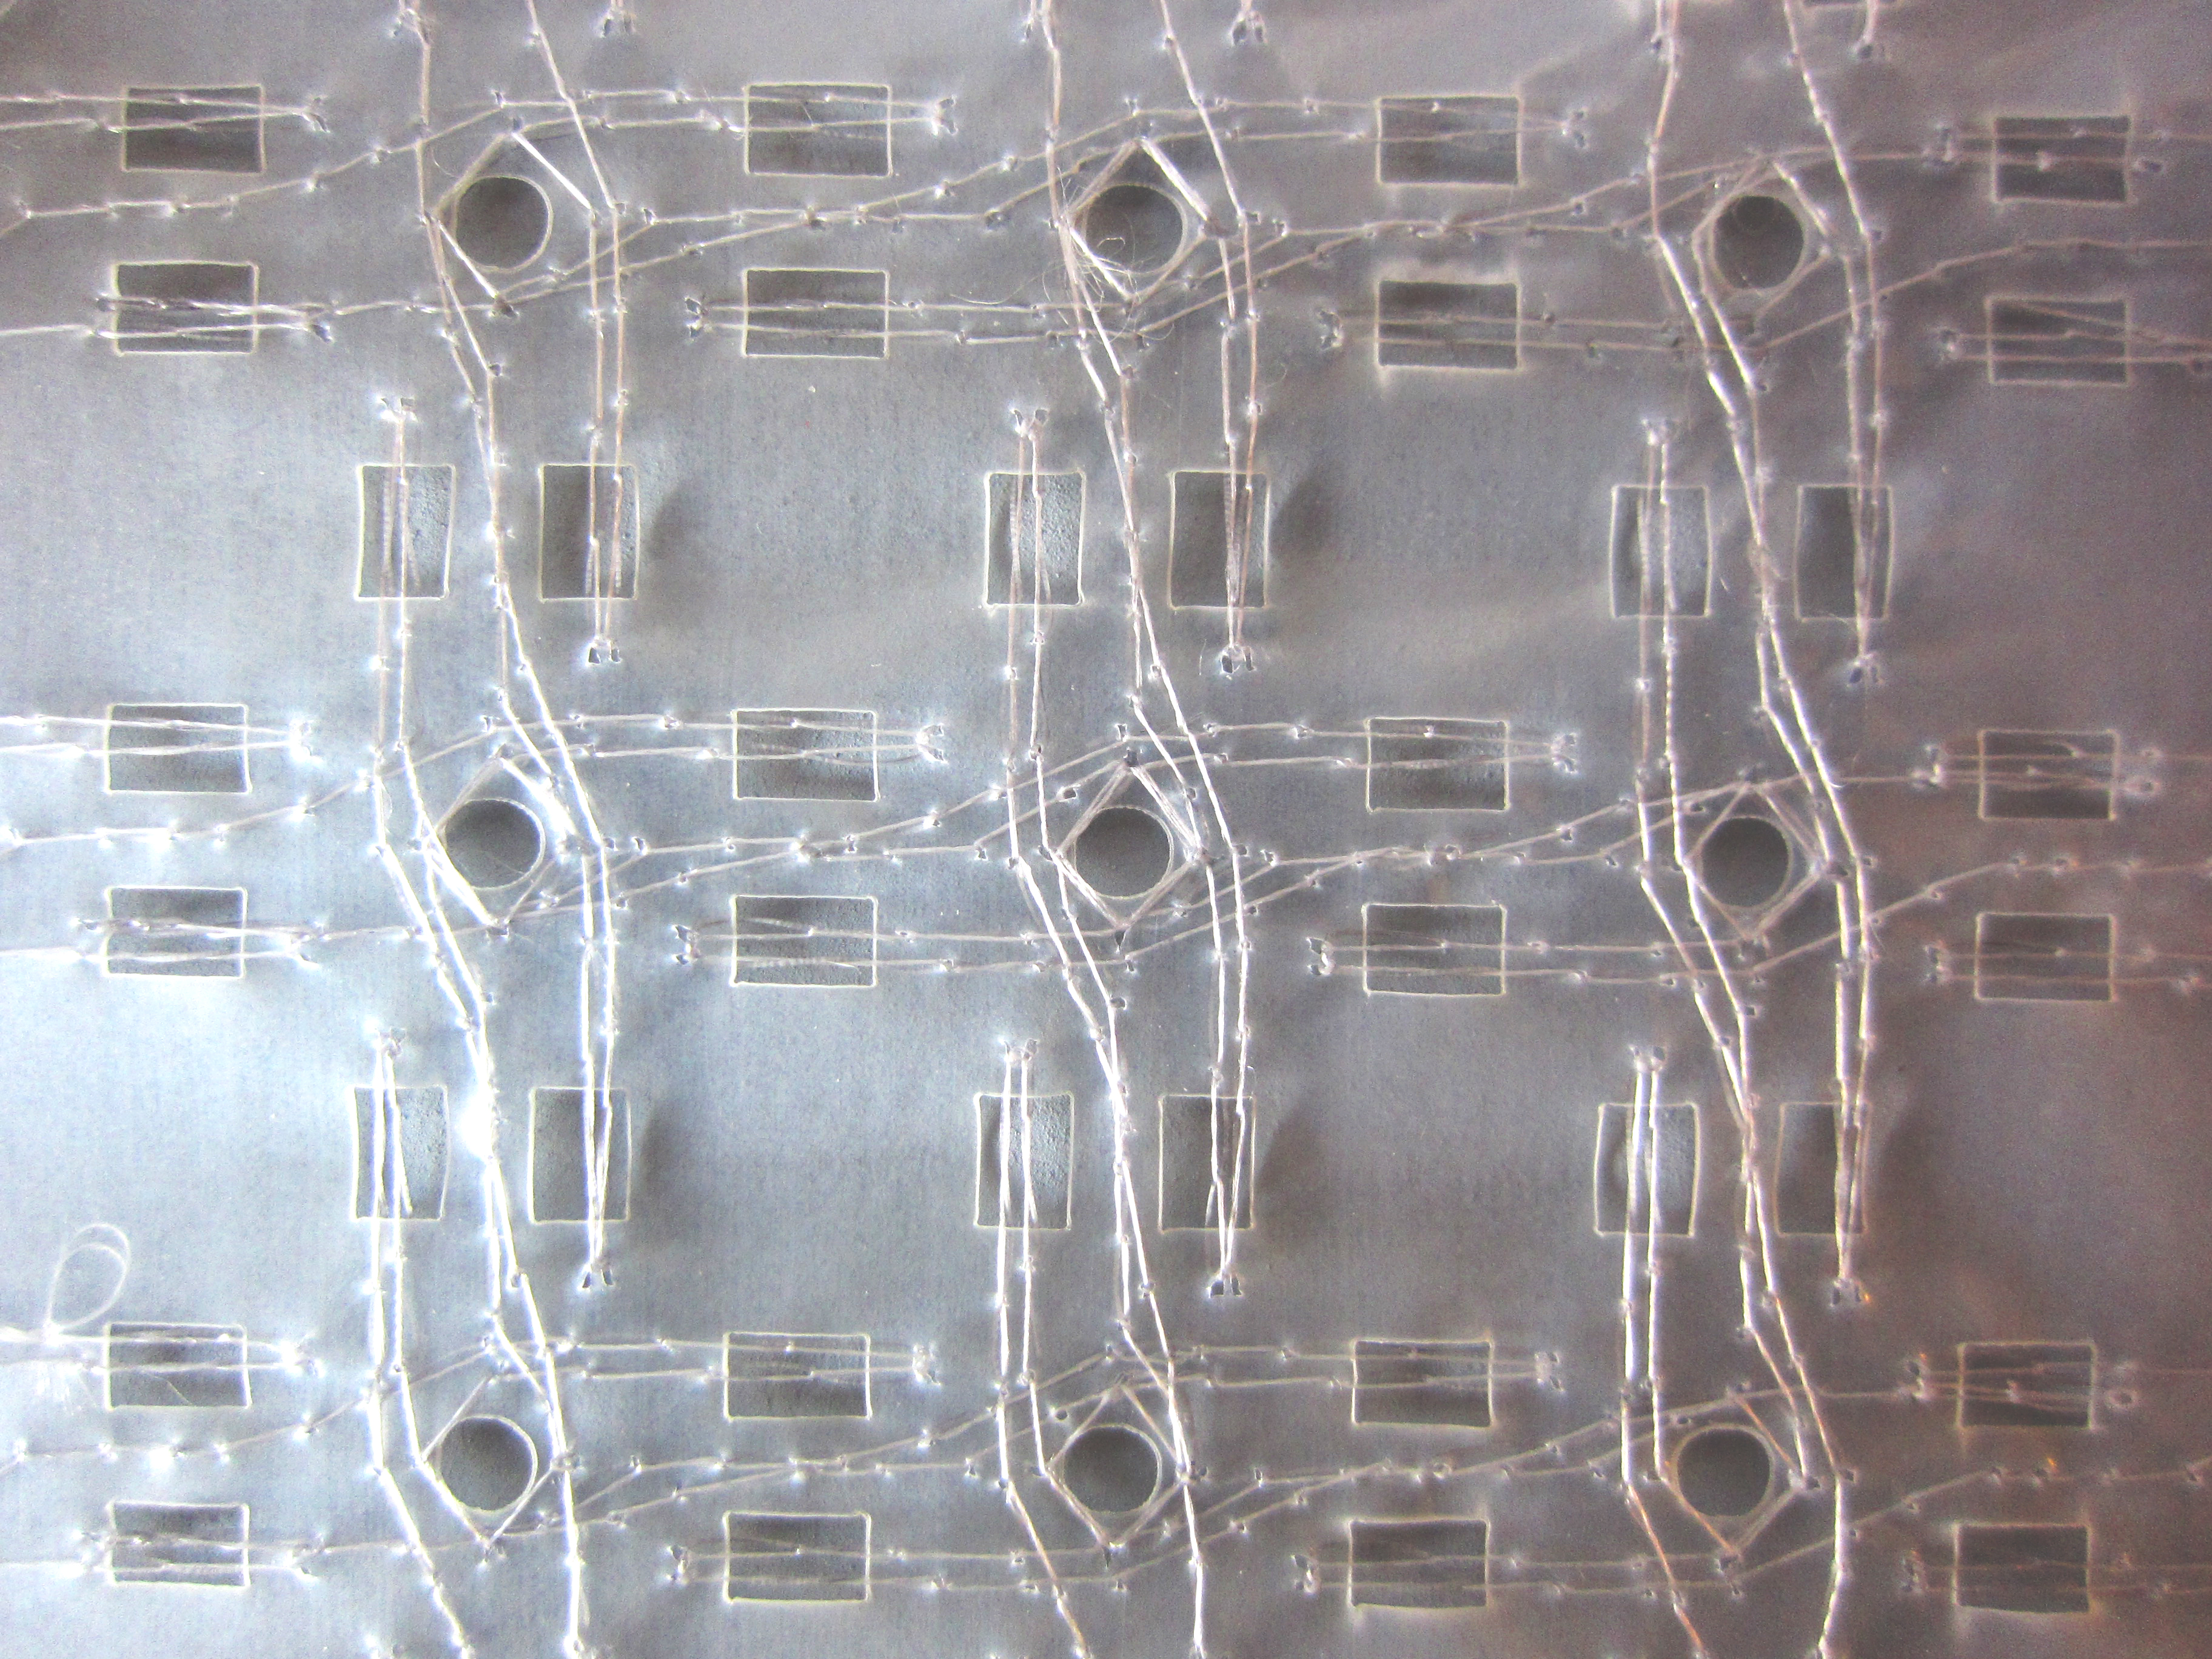 Fishing line sewn in a pattern around cutouts in a water-soluble clear plastic sheet